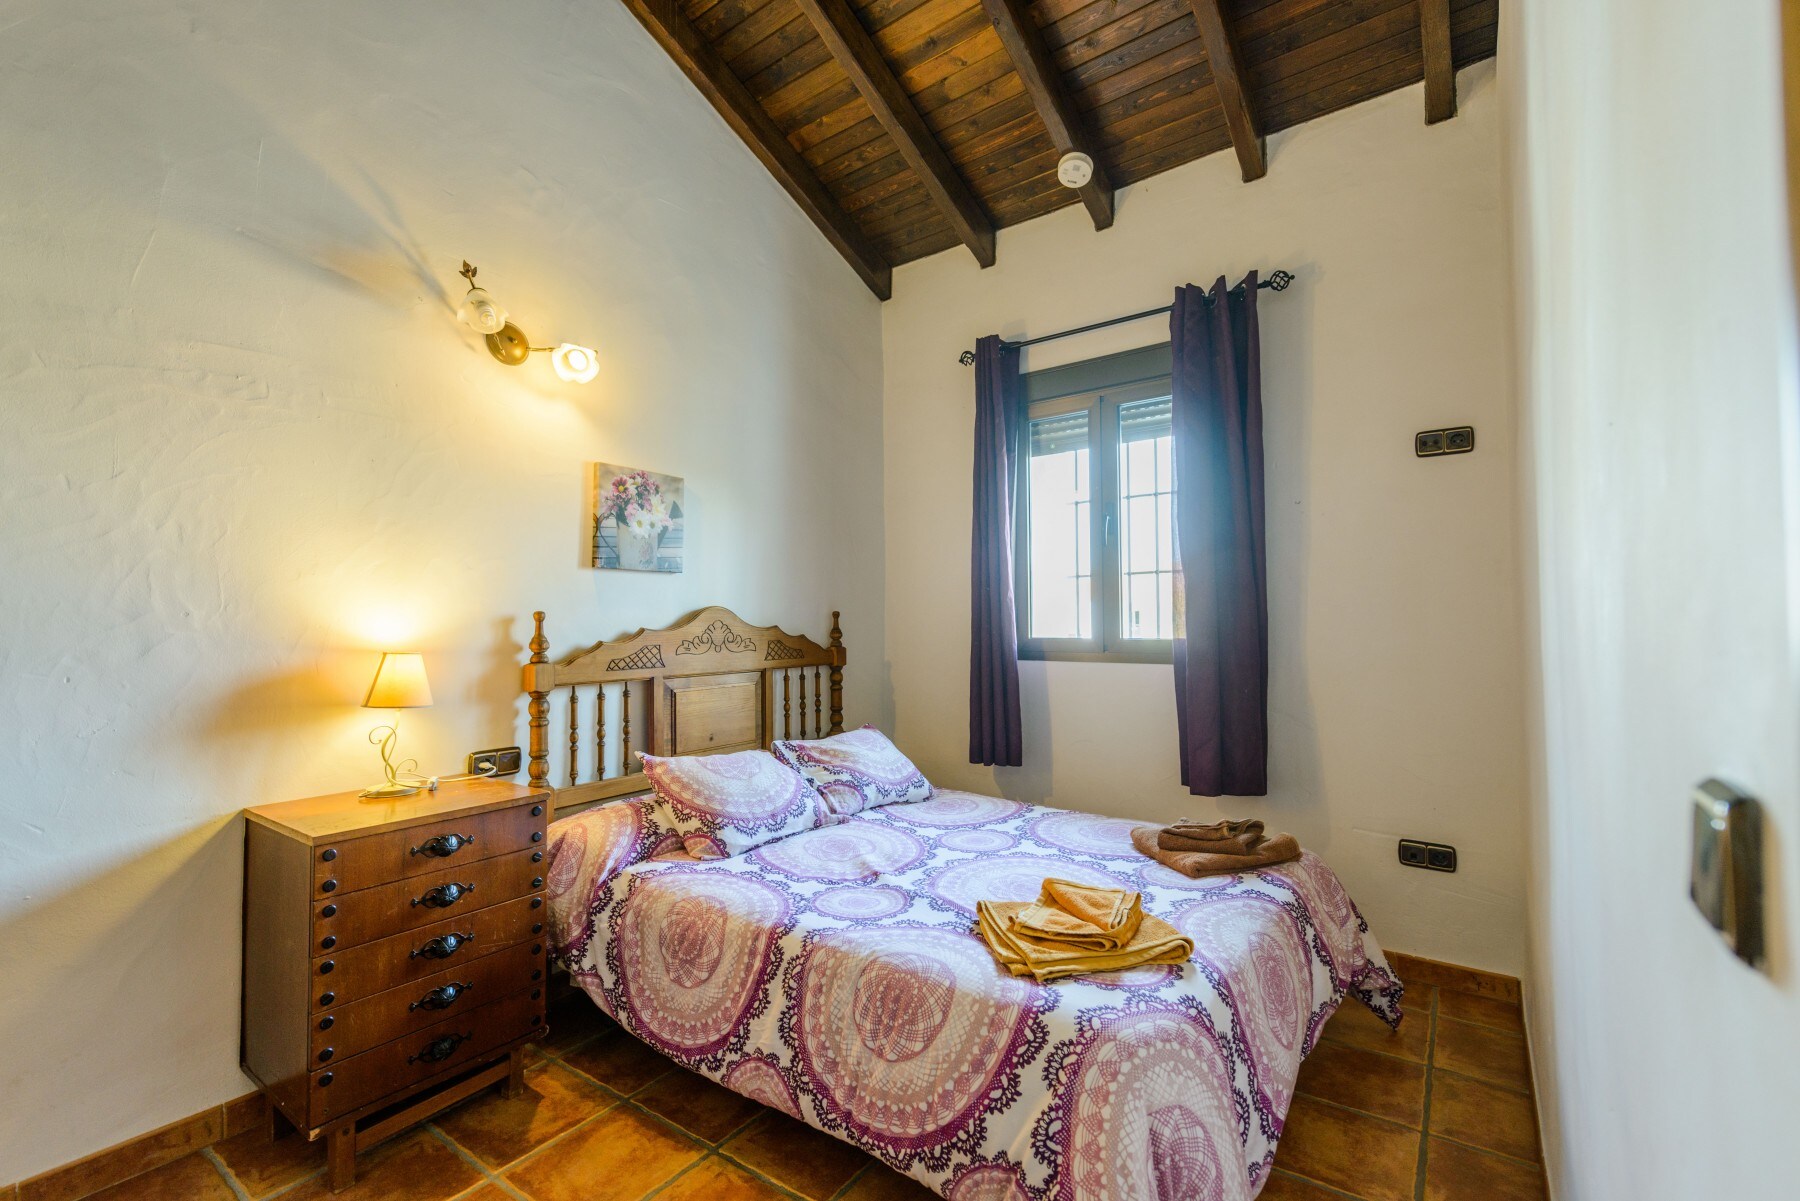 Enjoy the bedroom of this house with a fireplace in Alhaurín el Grande